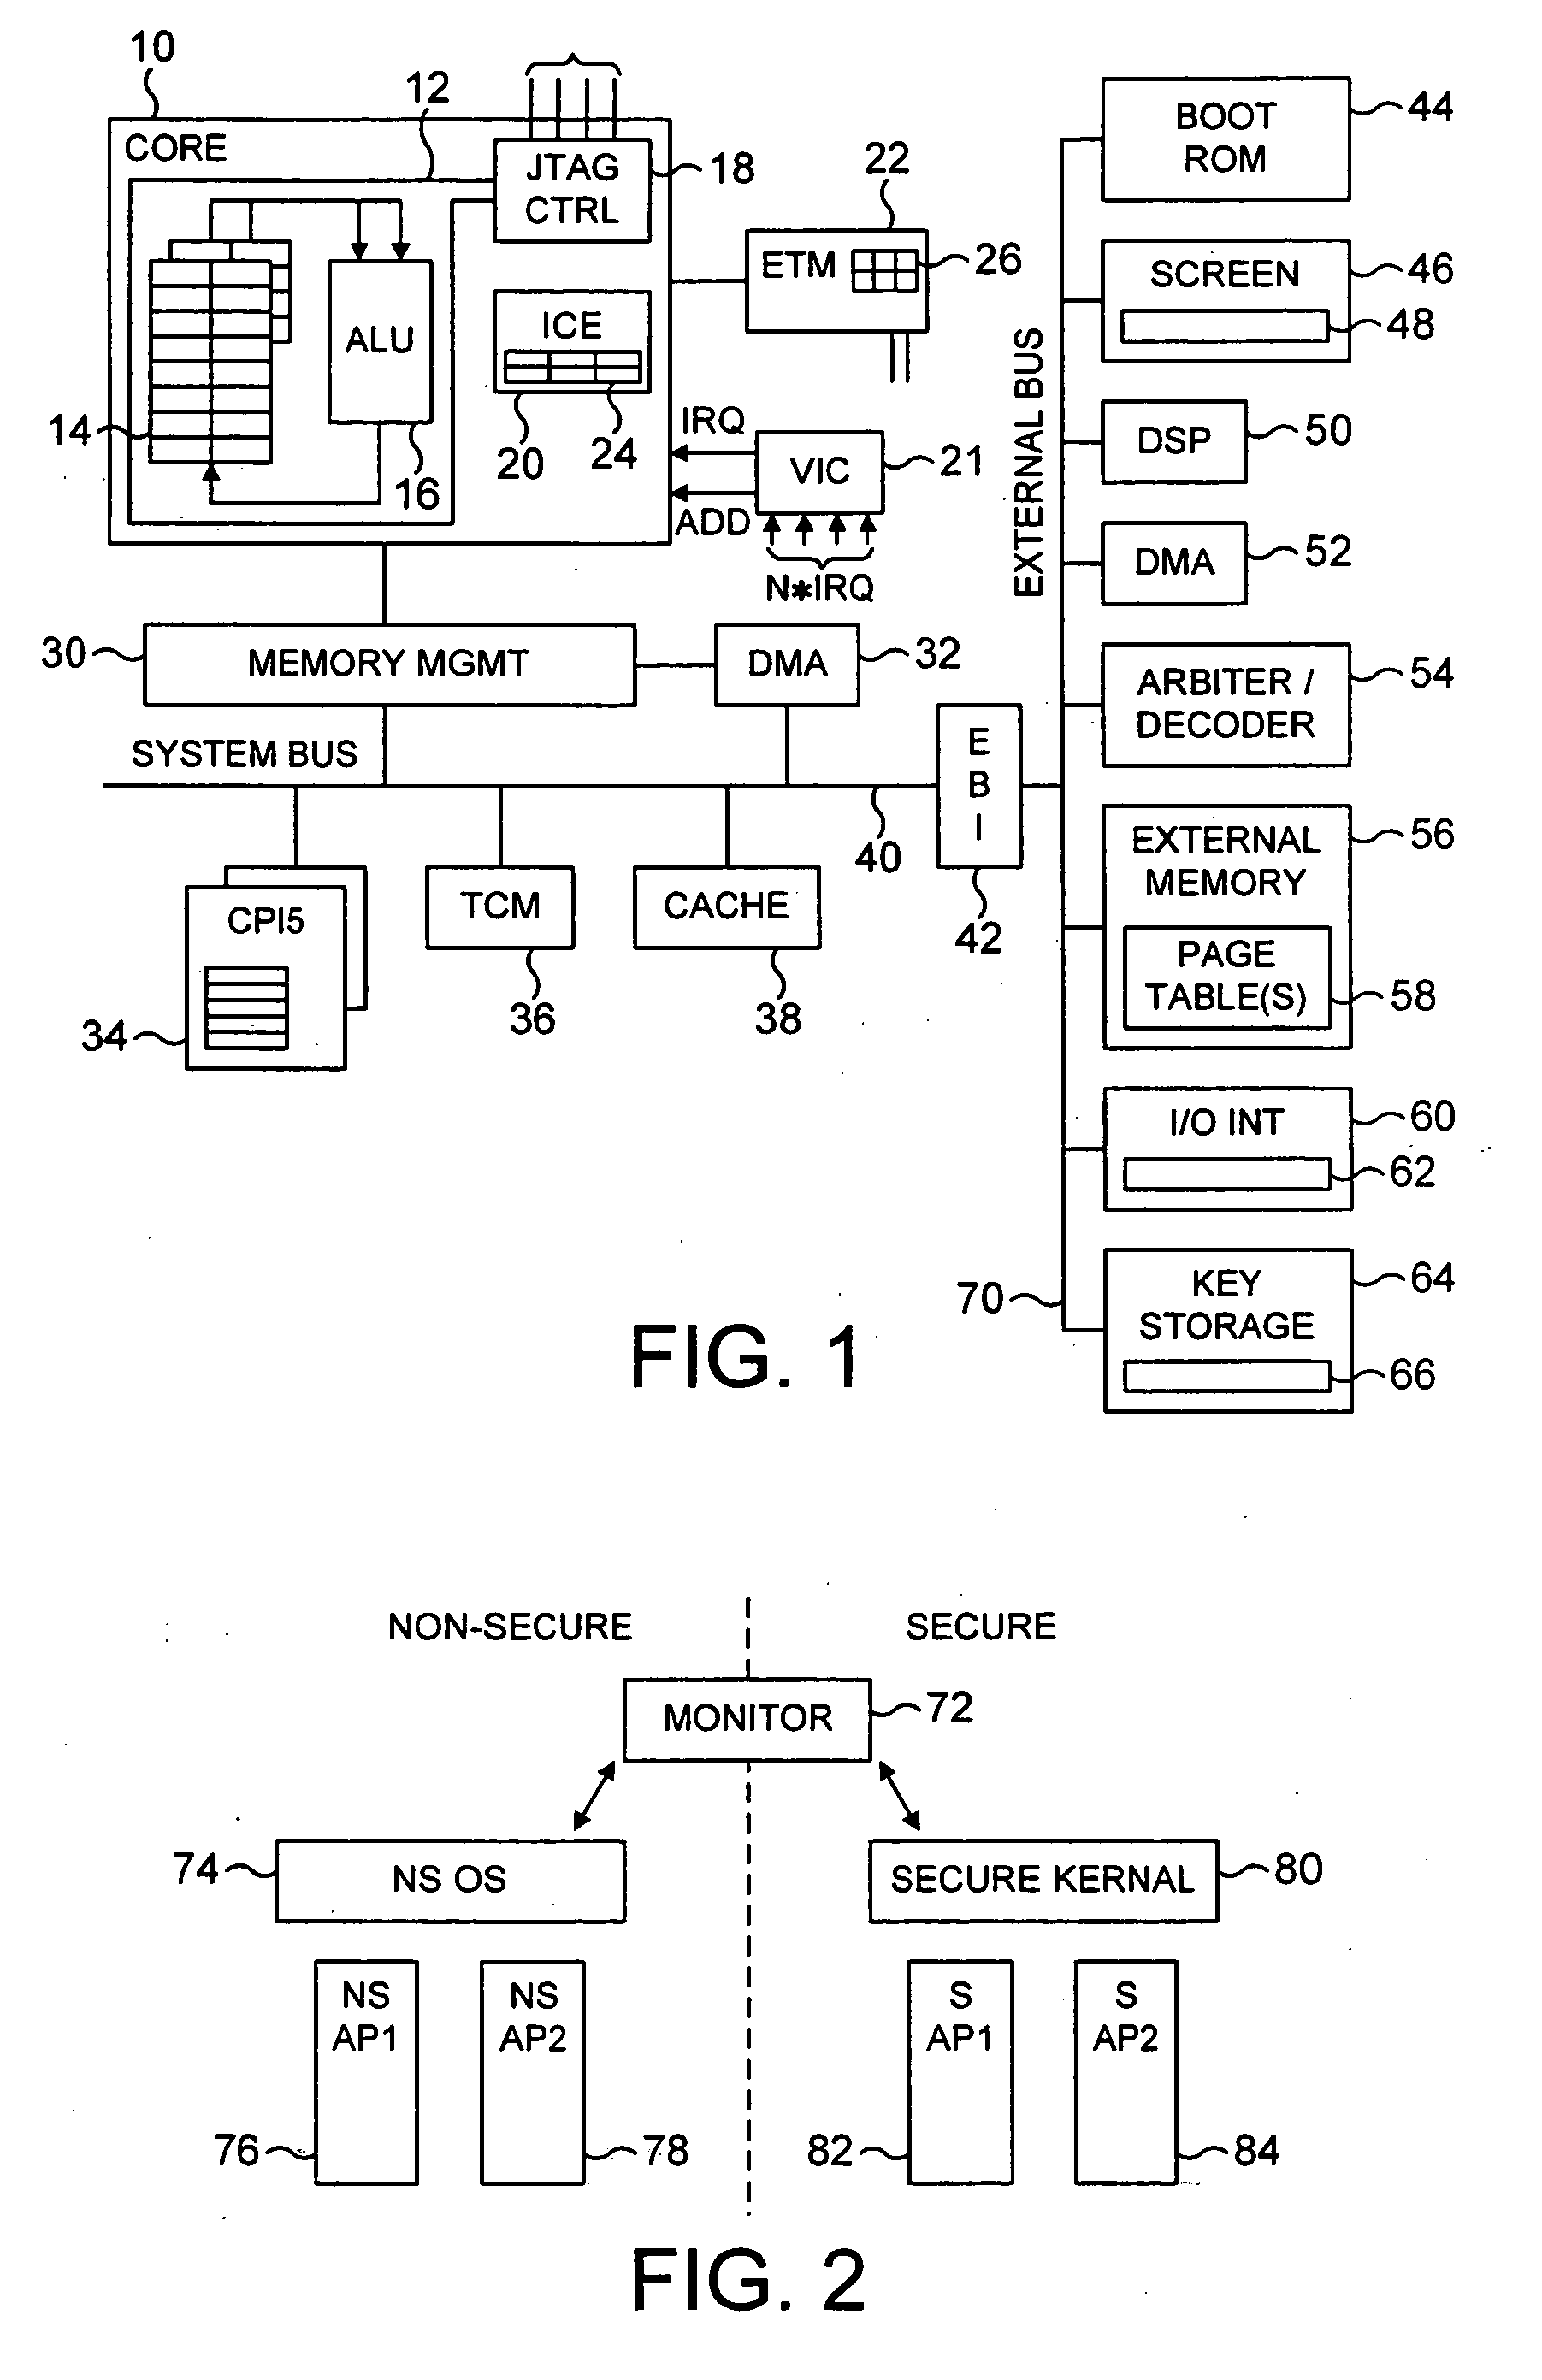 Control of access to a memory by a device